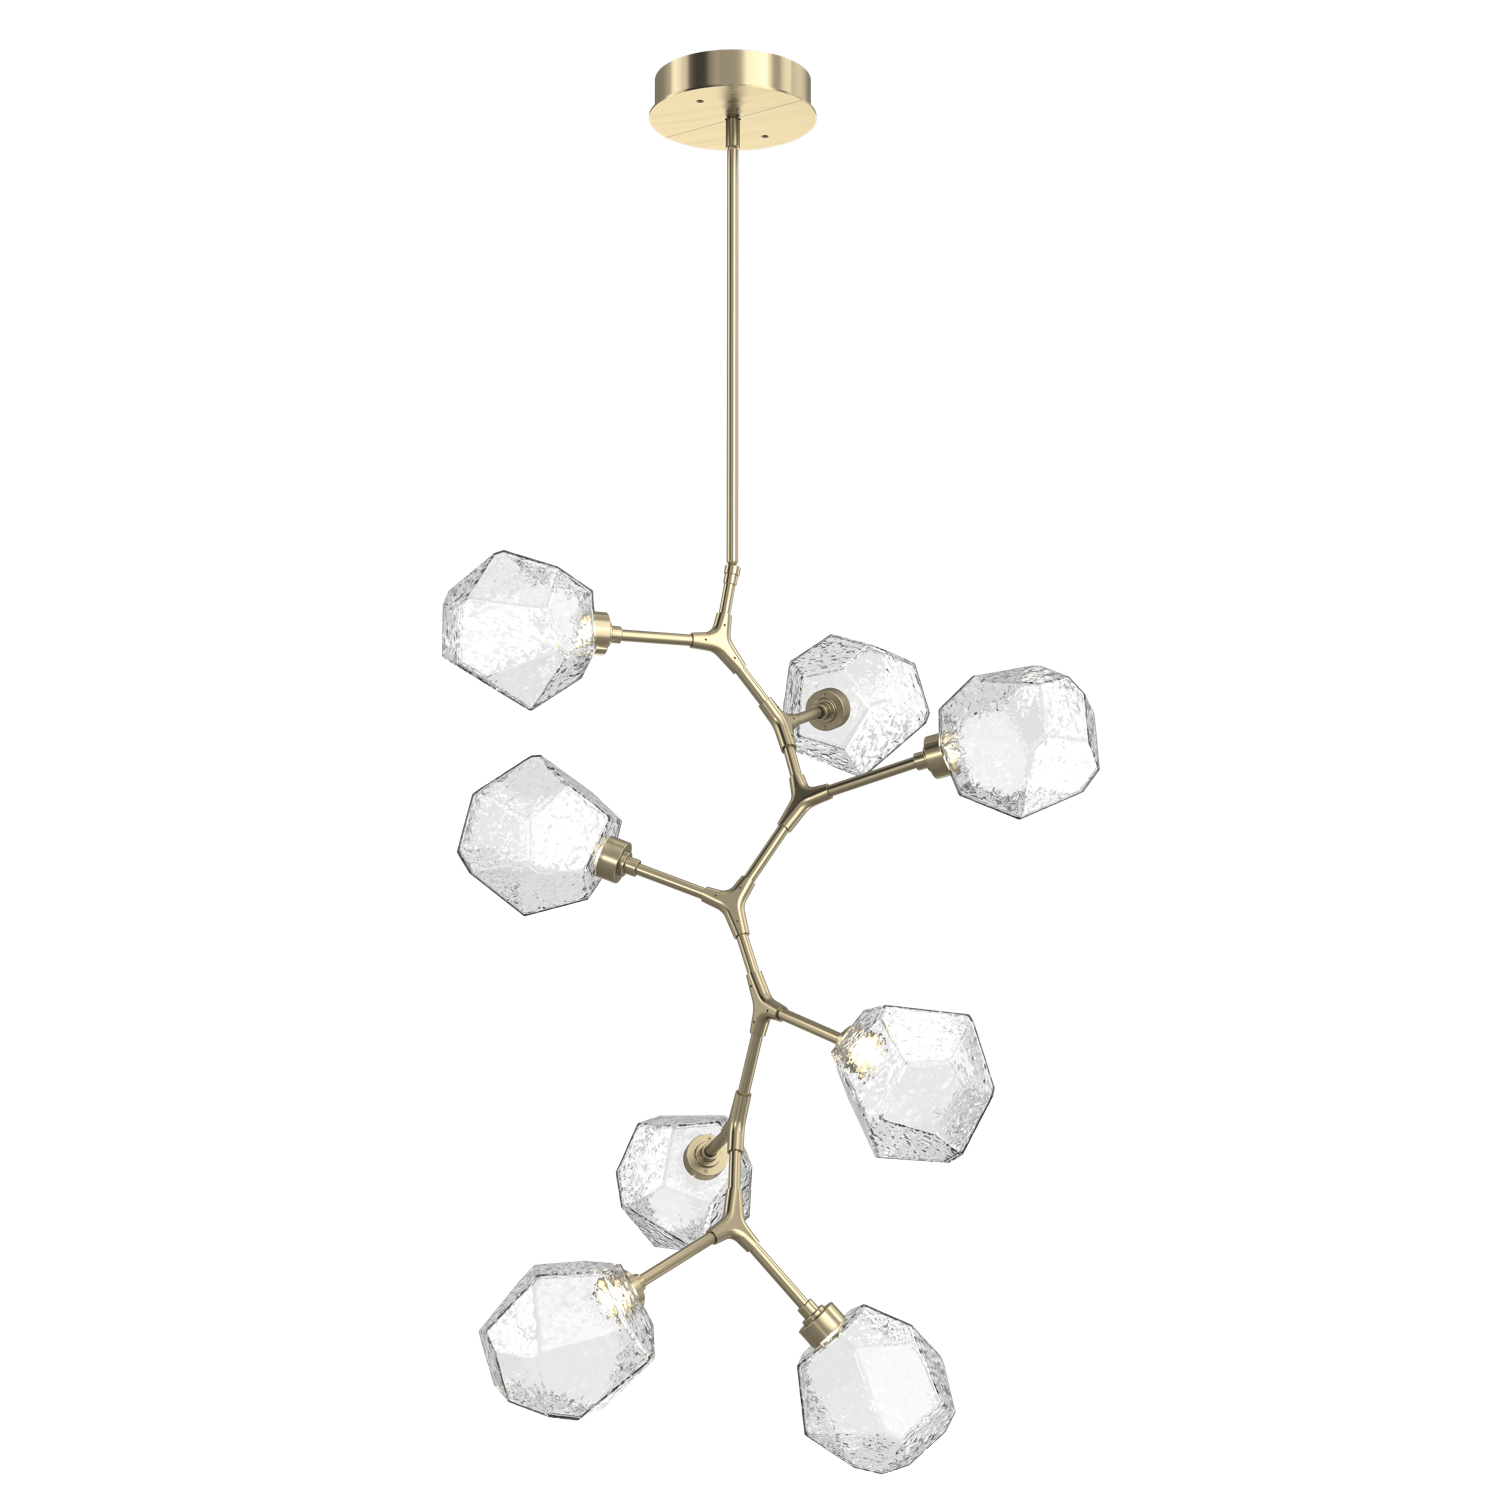 CHB0039-VB-HB-C-Hammerton-Studio-Gem-8-light-modern-vine-chandelier-with-heritage-brass-finish-and-clear-blown-glass-shades-and-LED-lamping